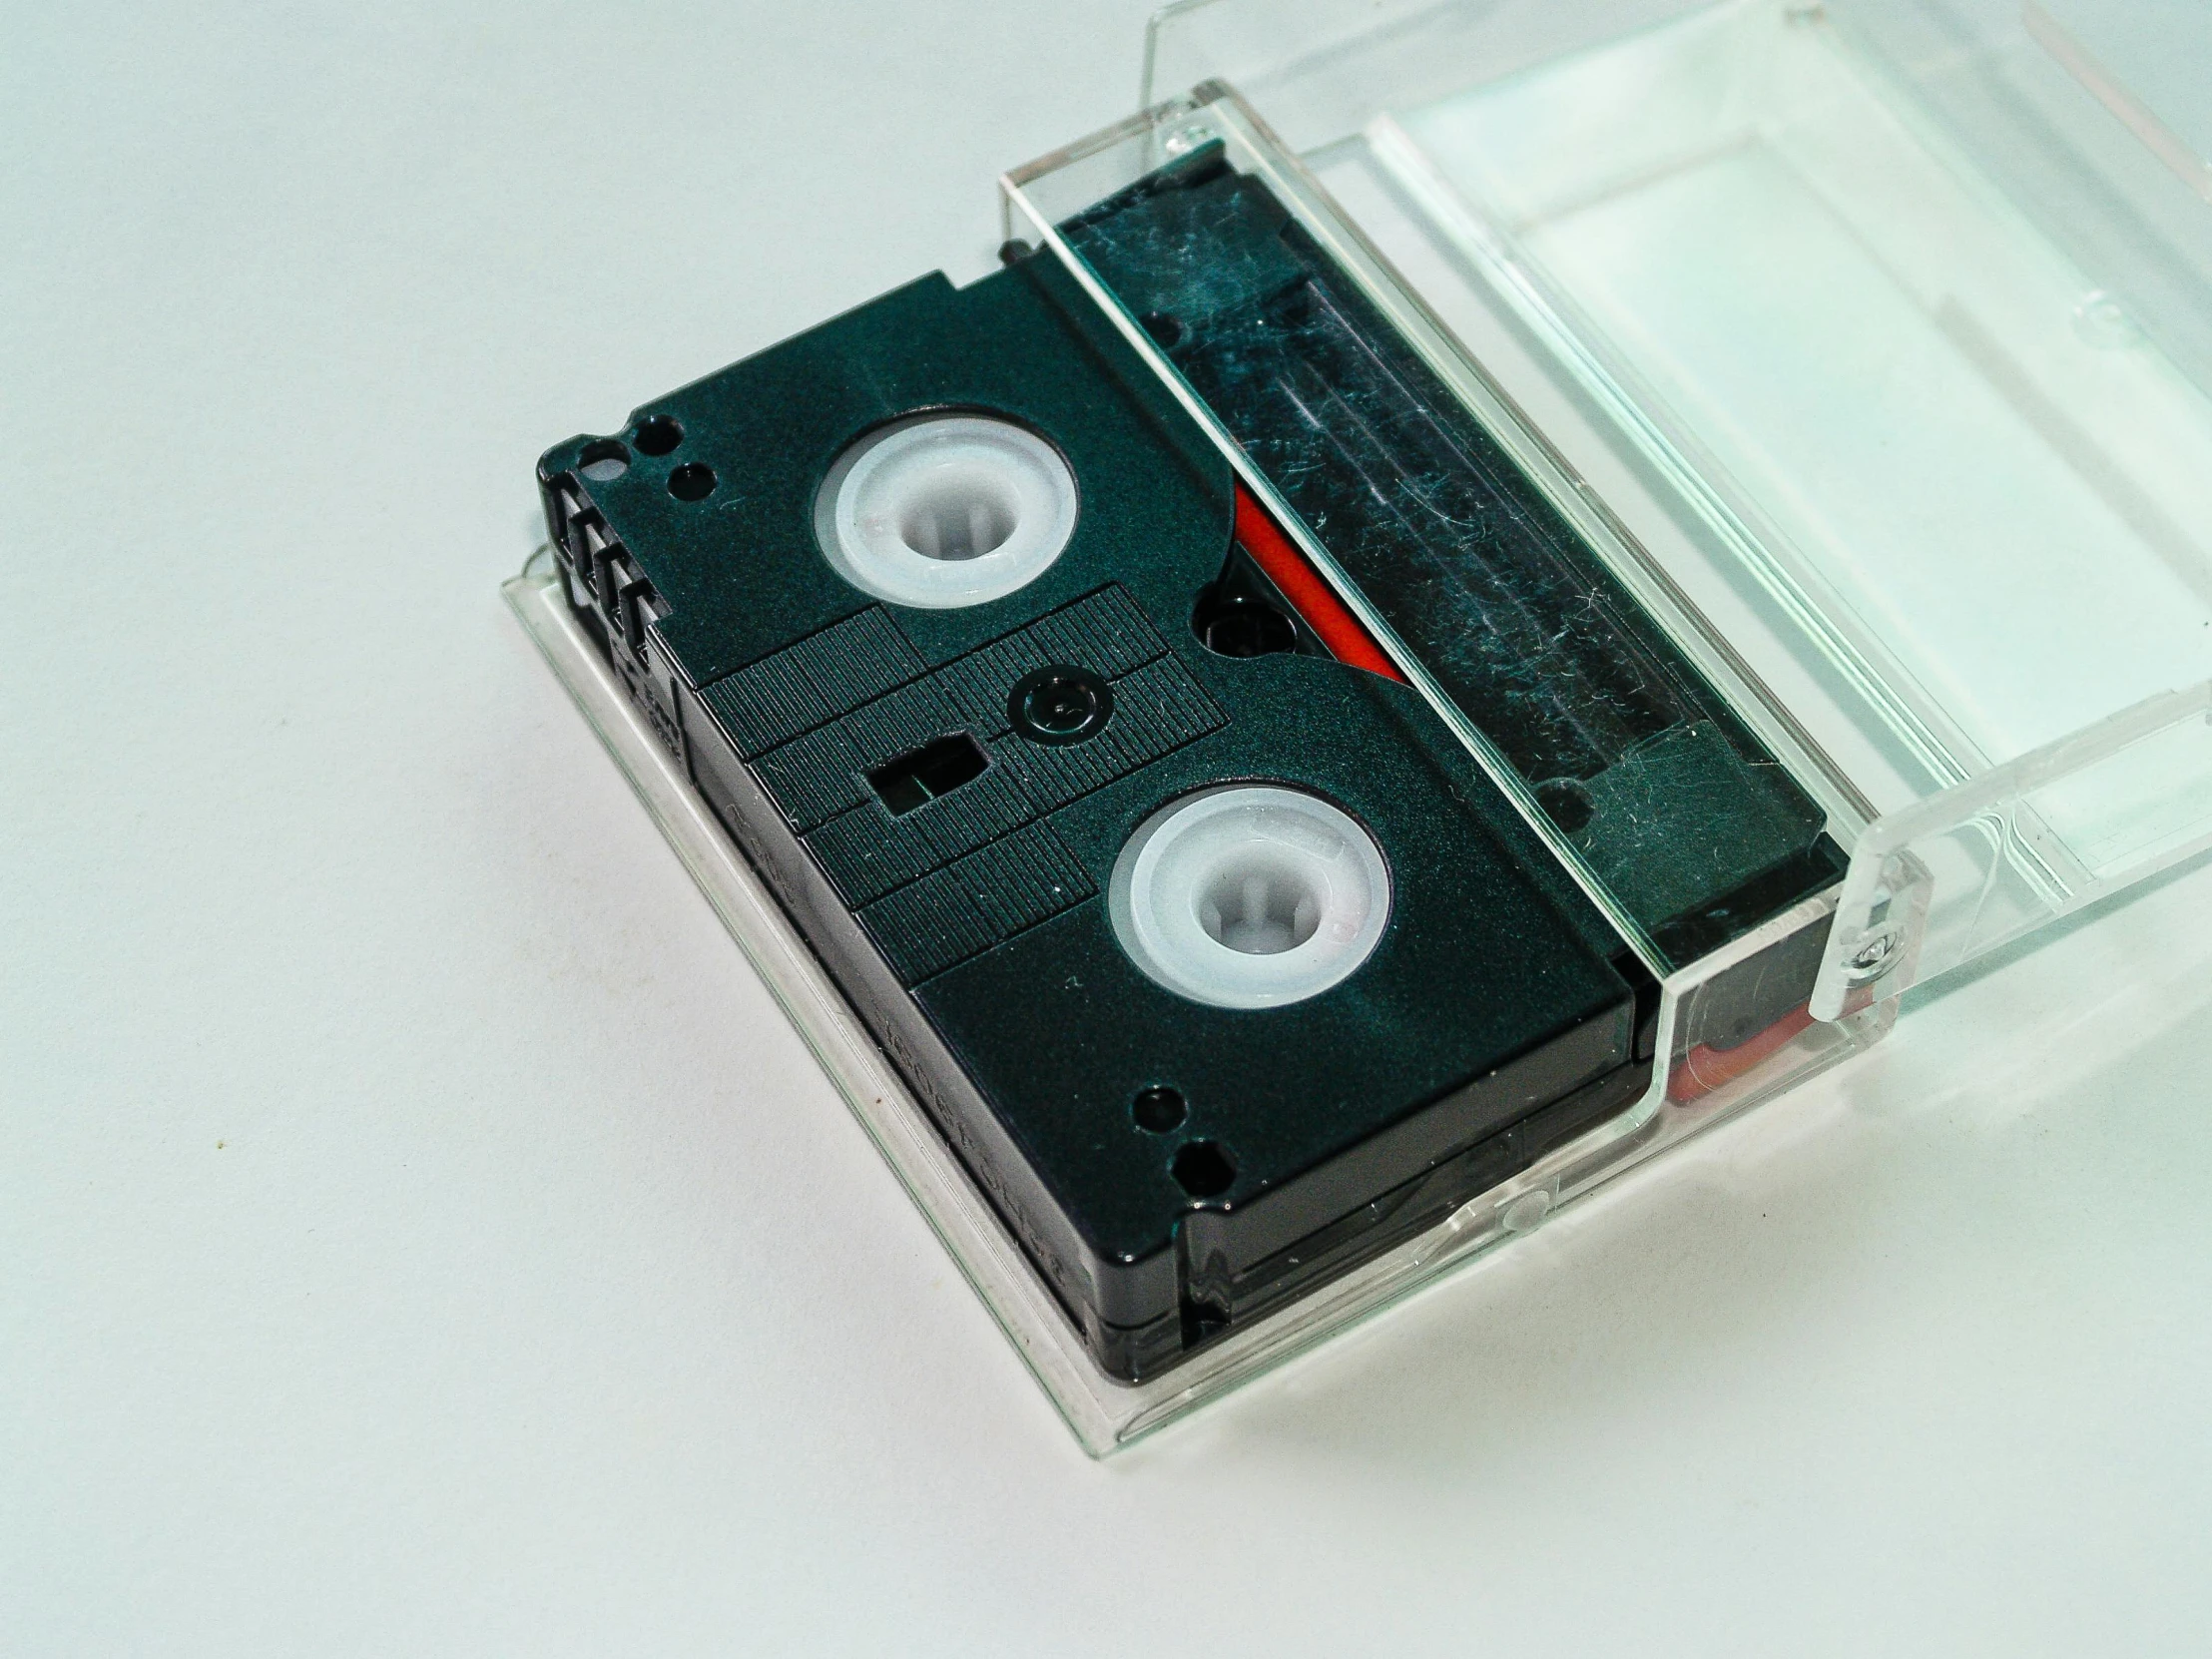 a close up of a cassette in a clear case, unsplash, video art, black 3 d cuboid device, set against a white background, old school, high quality product image”